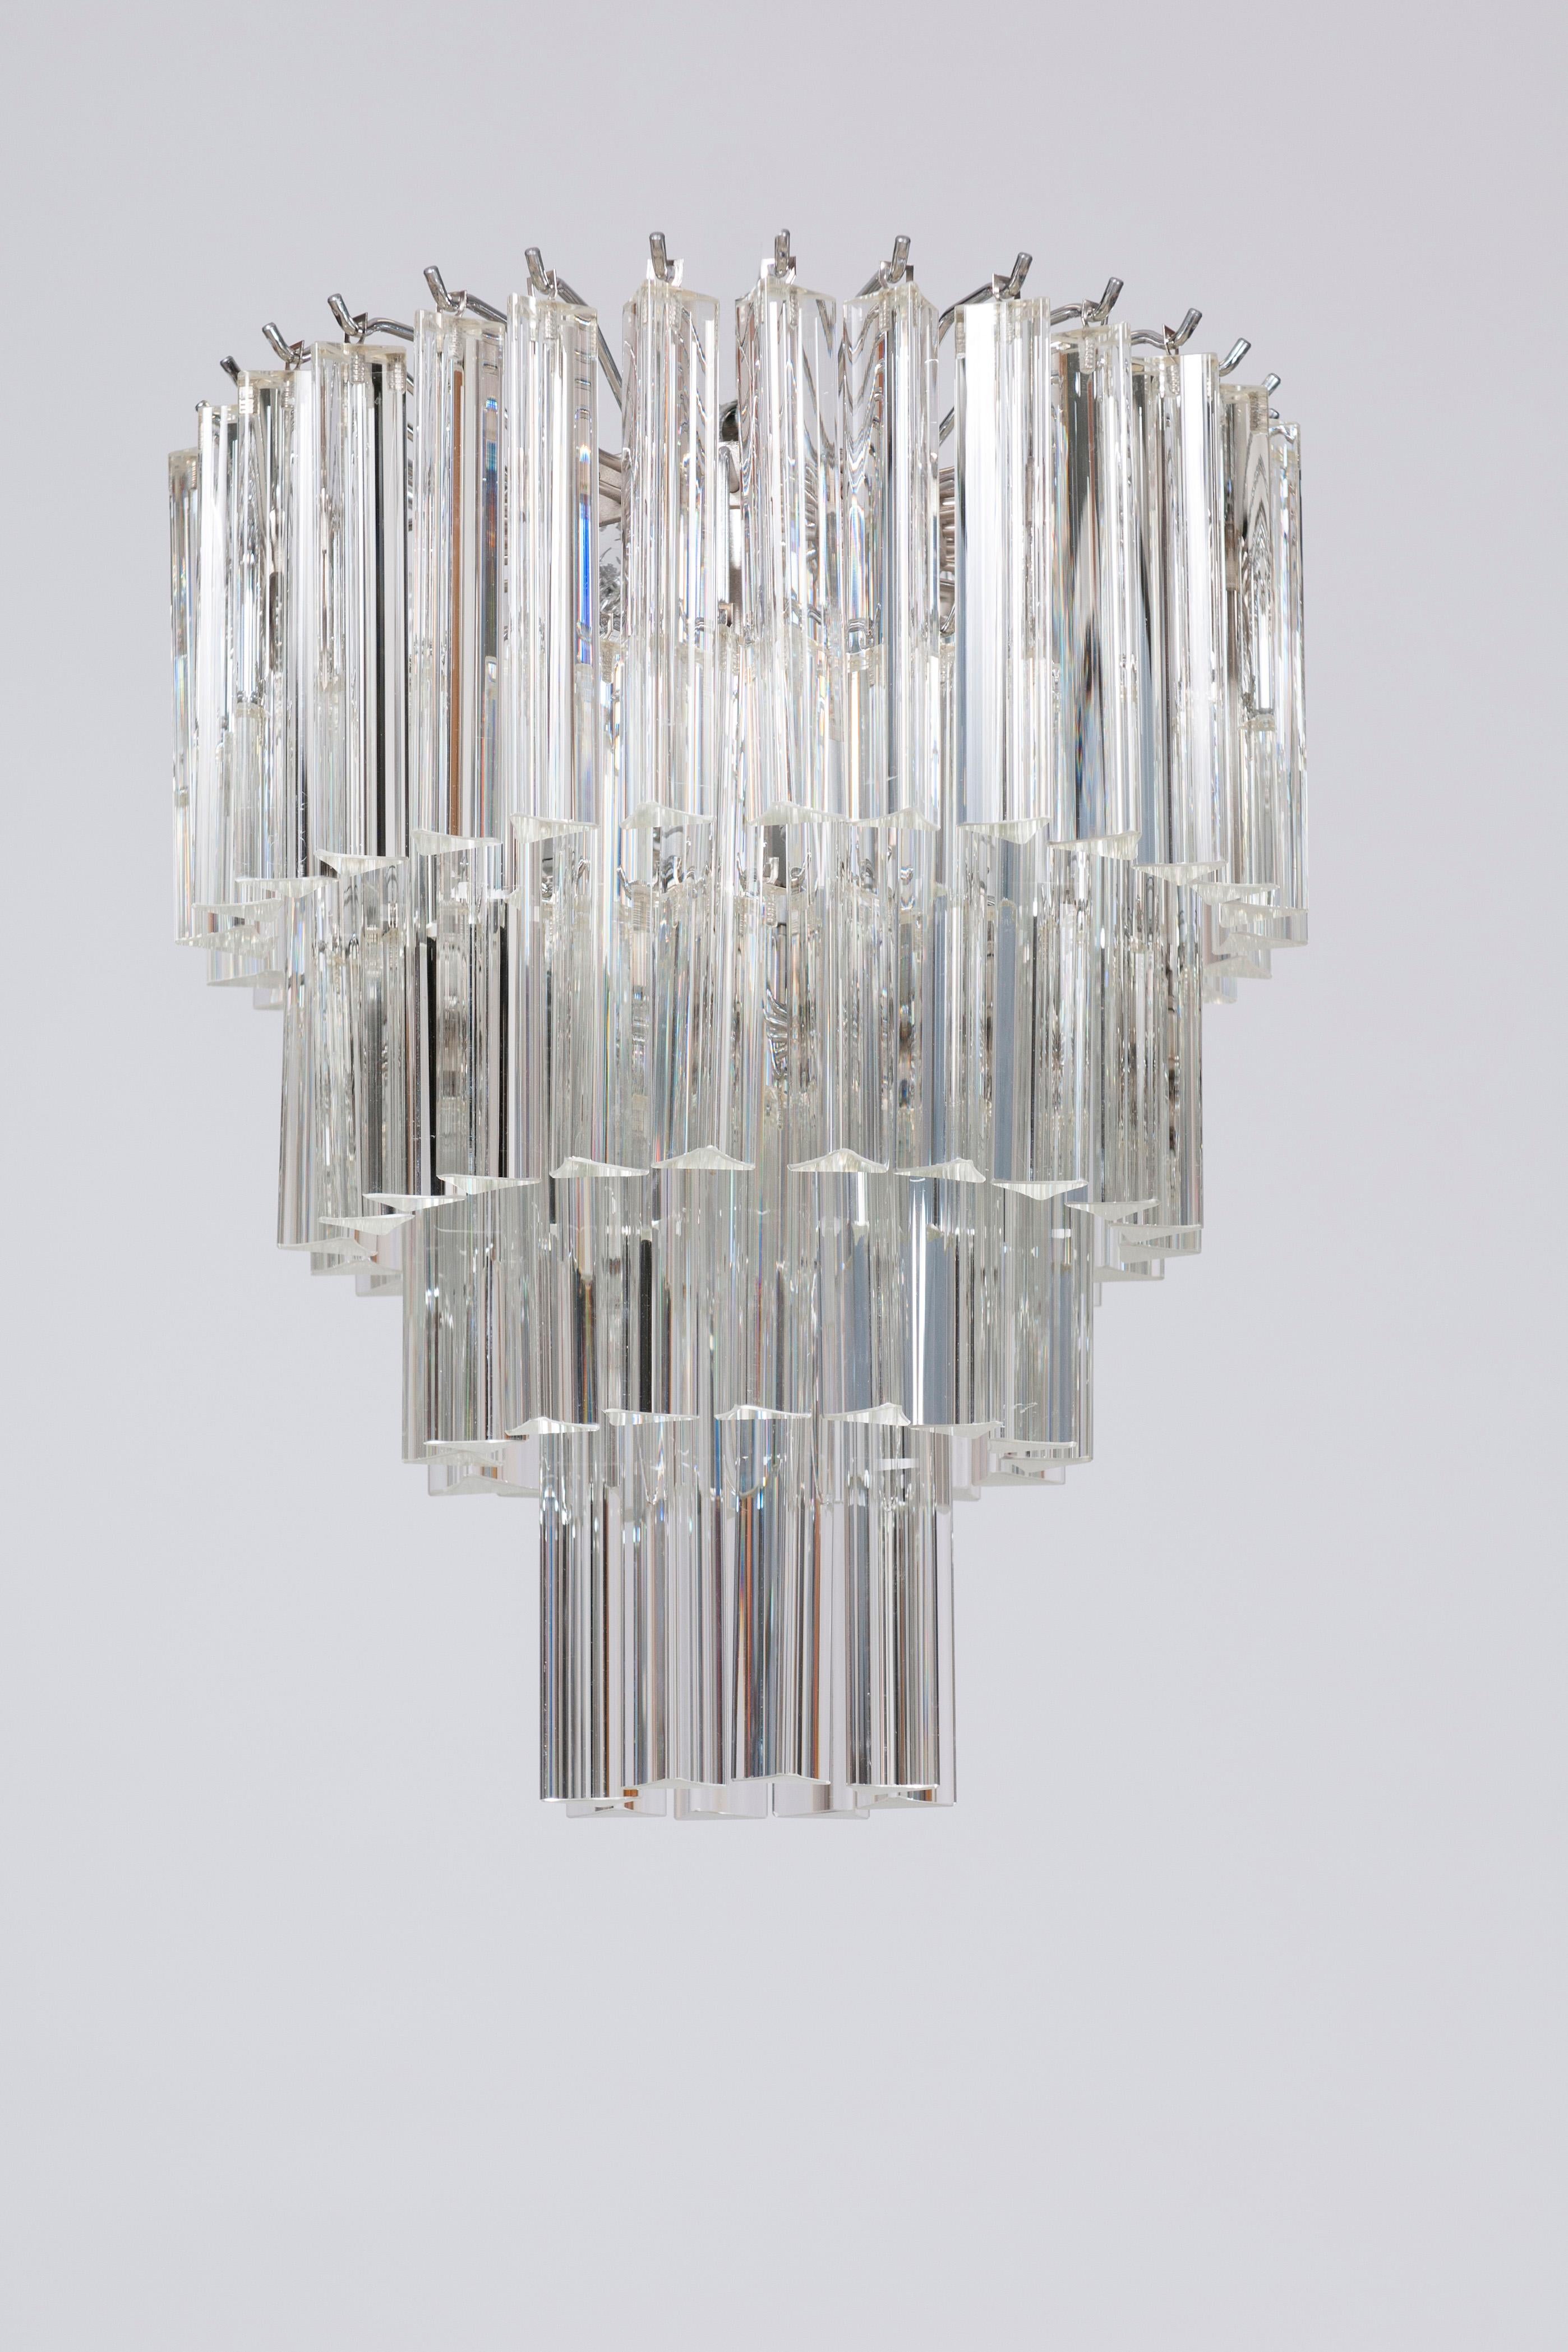 Shiny Camer Trihedrons Murano Glass Chandelier 1970s Venice

Entirely handmade of Murano glass and steel in the 1970s, this luxurious chandelier is attributed to the Venetian glassmaker Camer Glass. 
Consisting of 4 rounds of triads, this chandelier